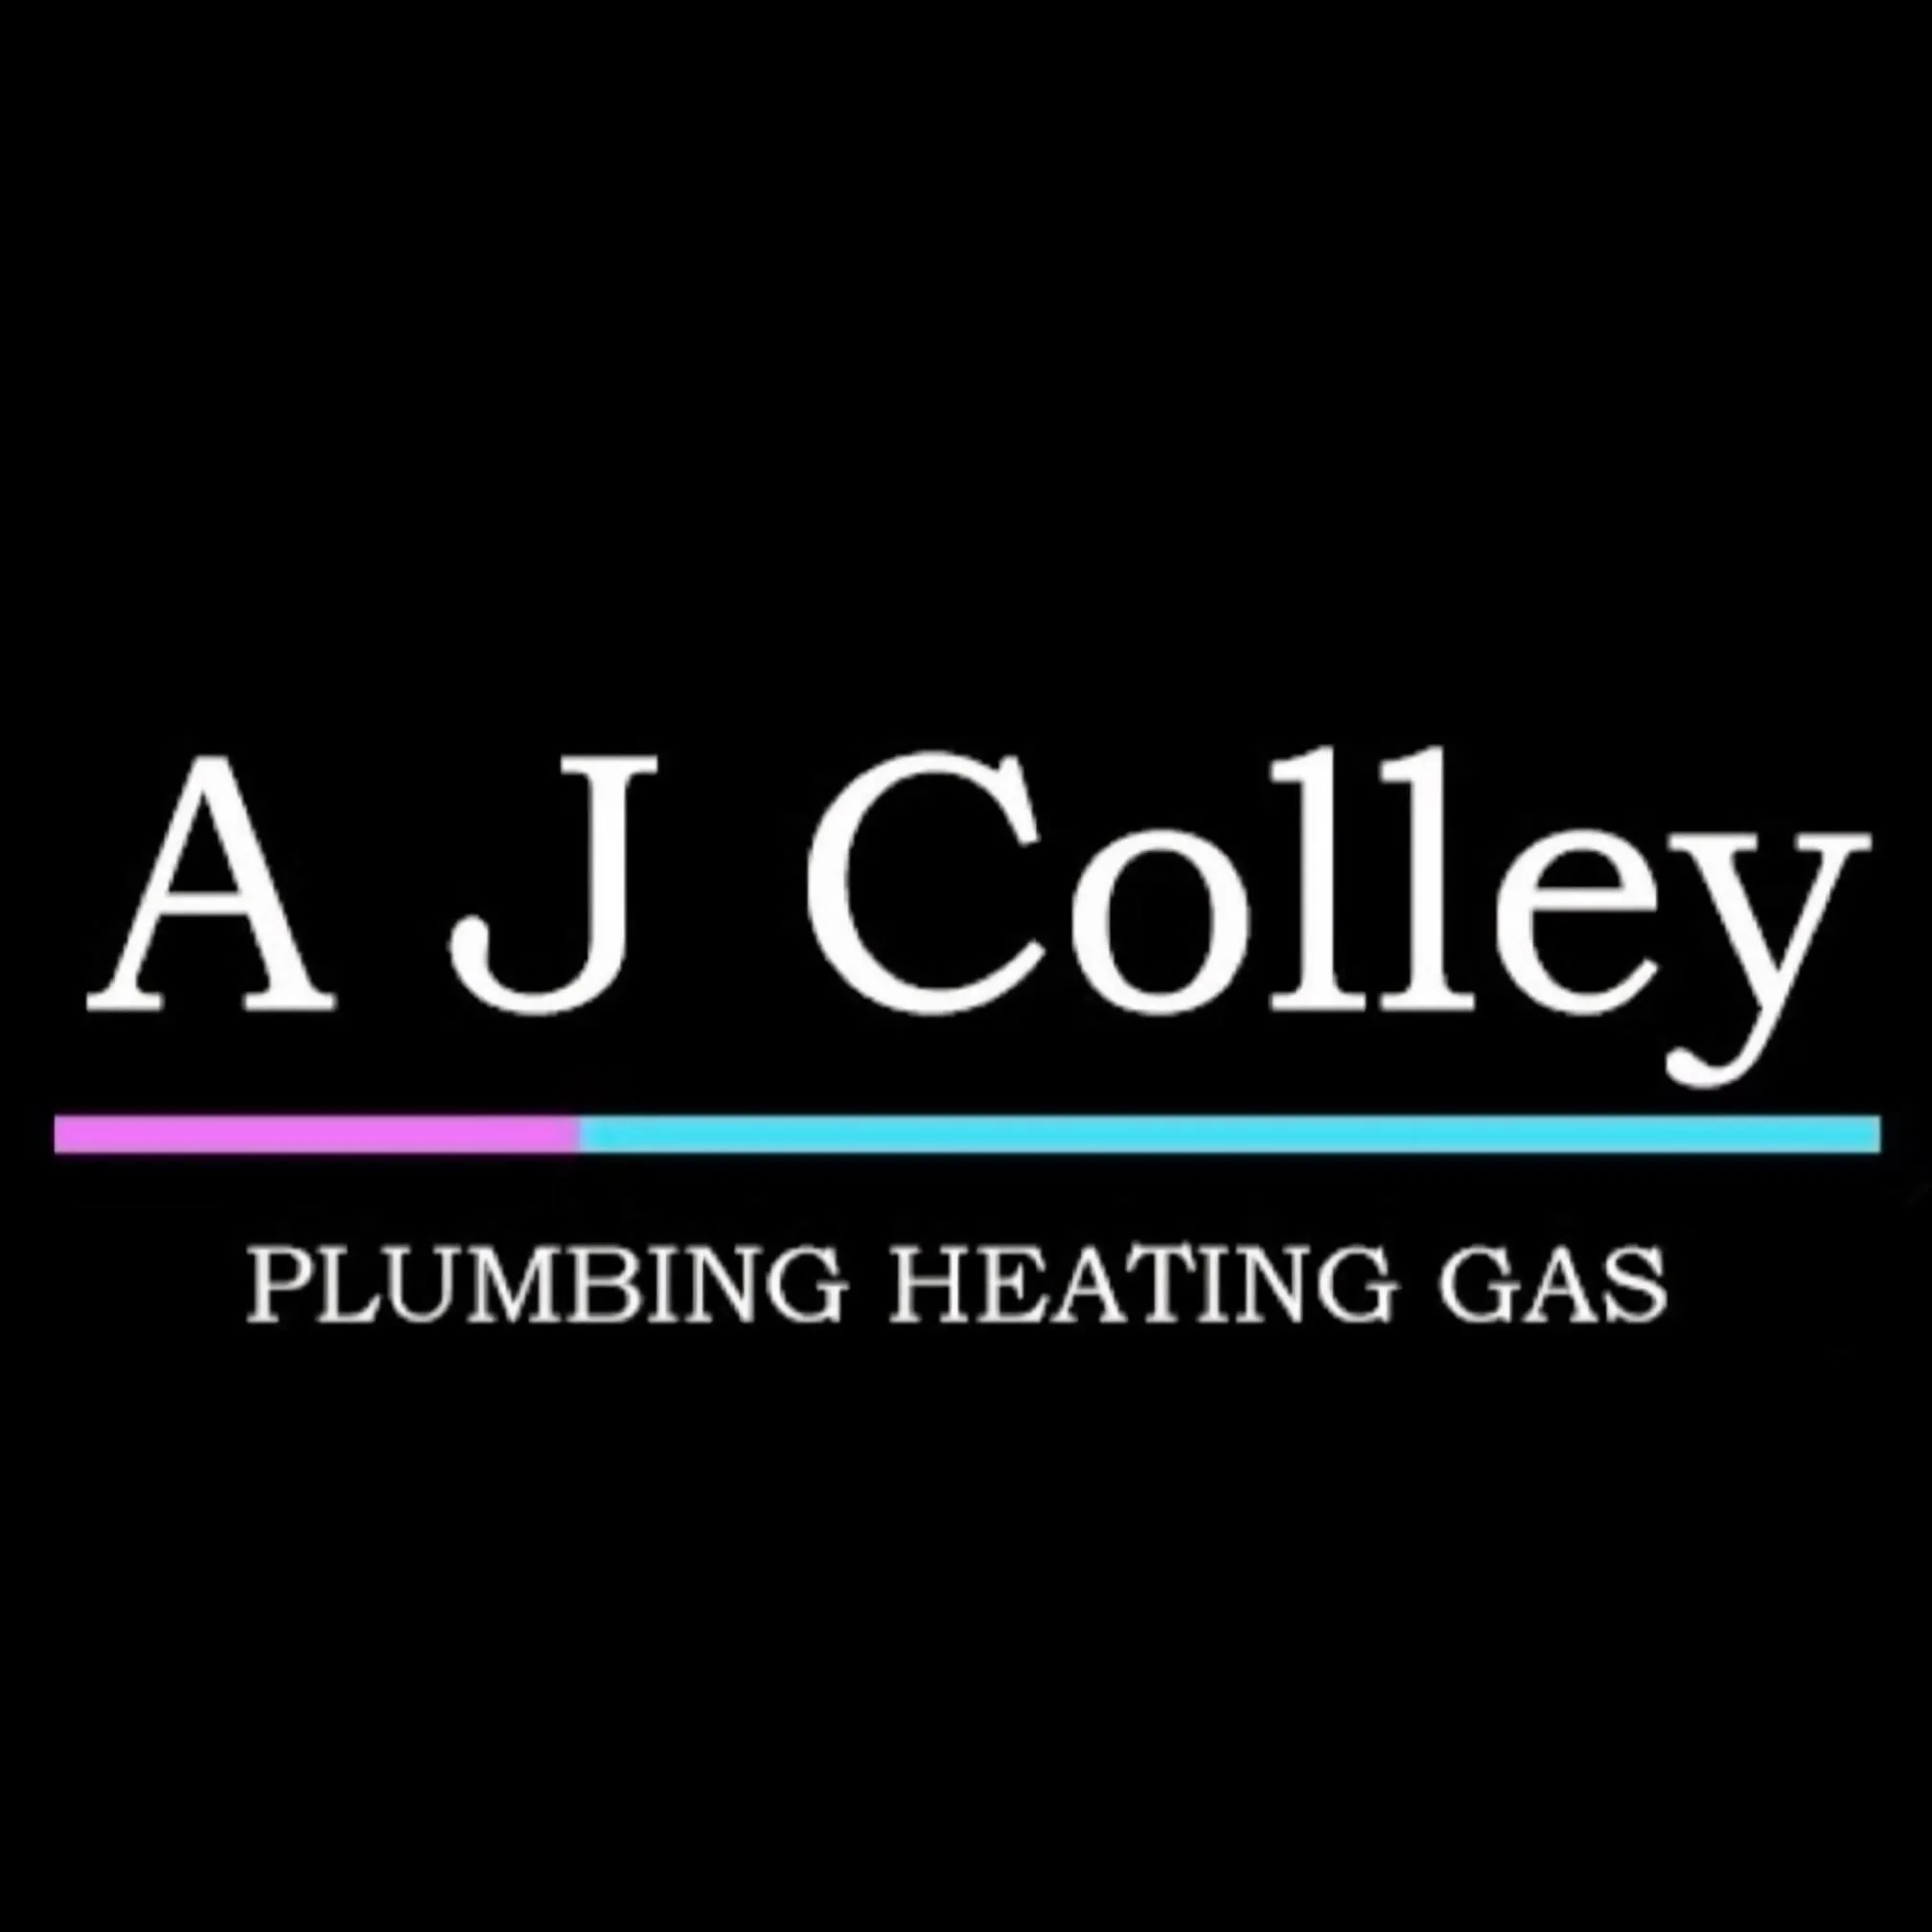 LOGO A J Colley Plumbing Heating Gas Whitstable 07886 001549